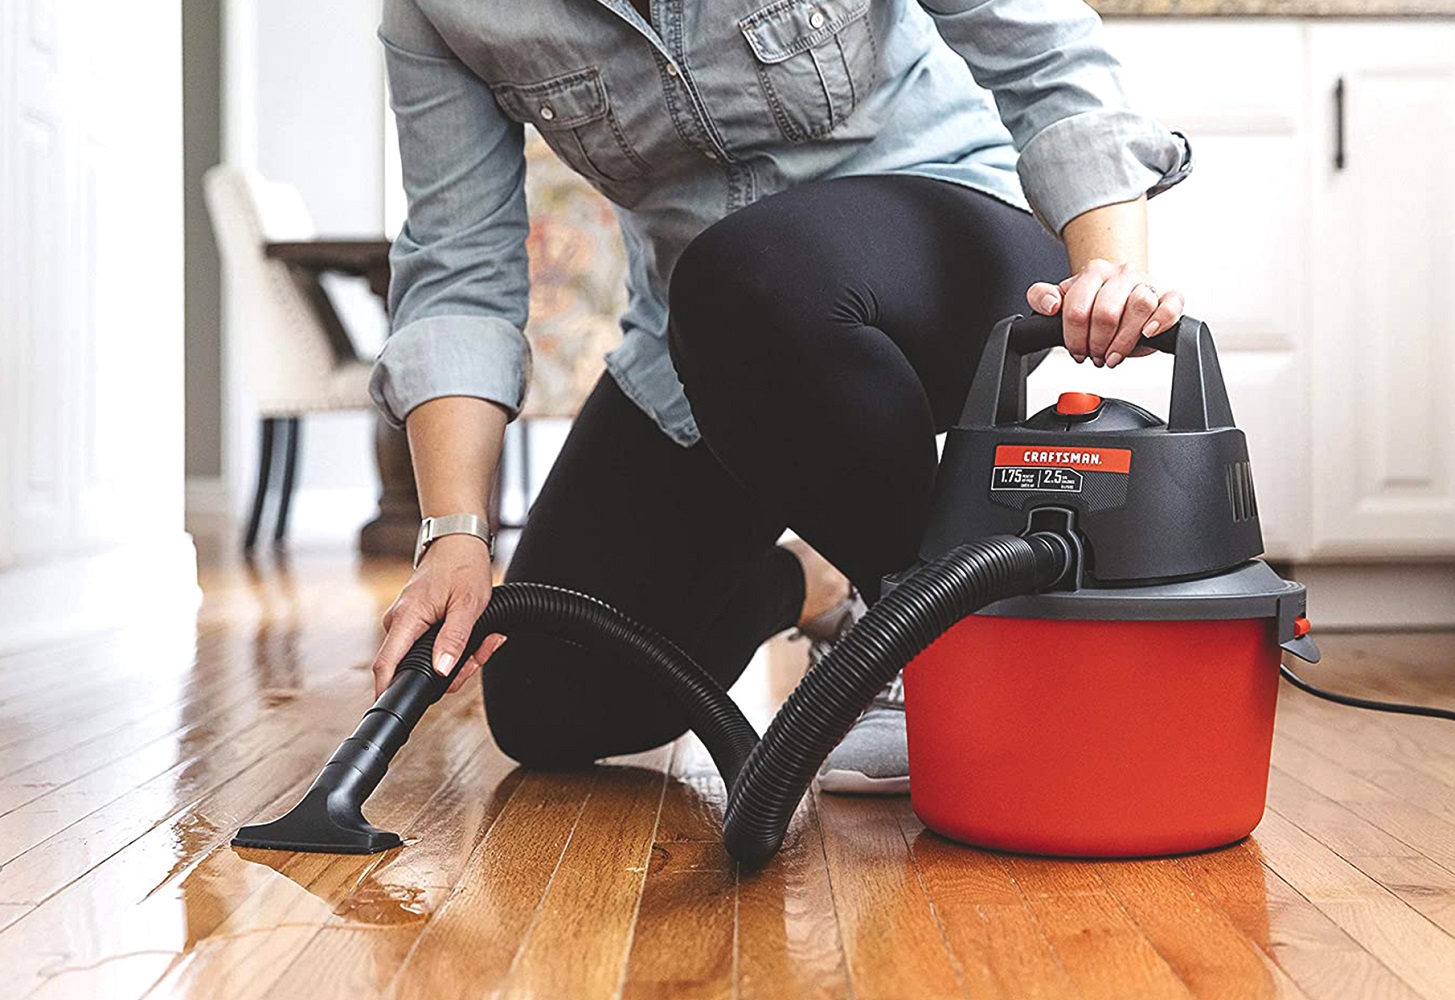 4 Best Wet/Dry Vacuums for May 2022